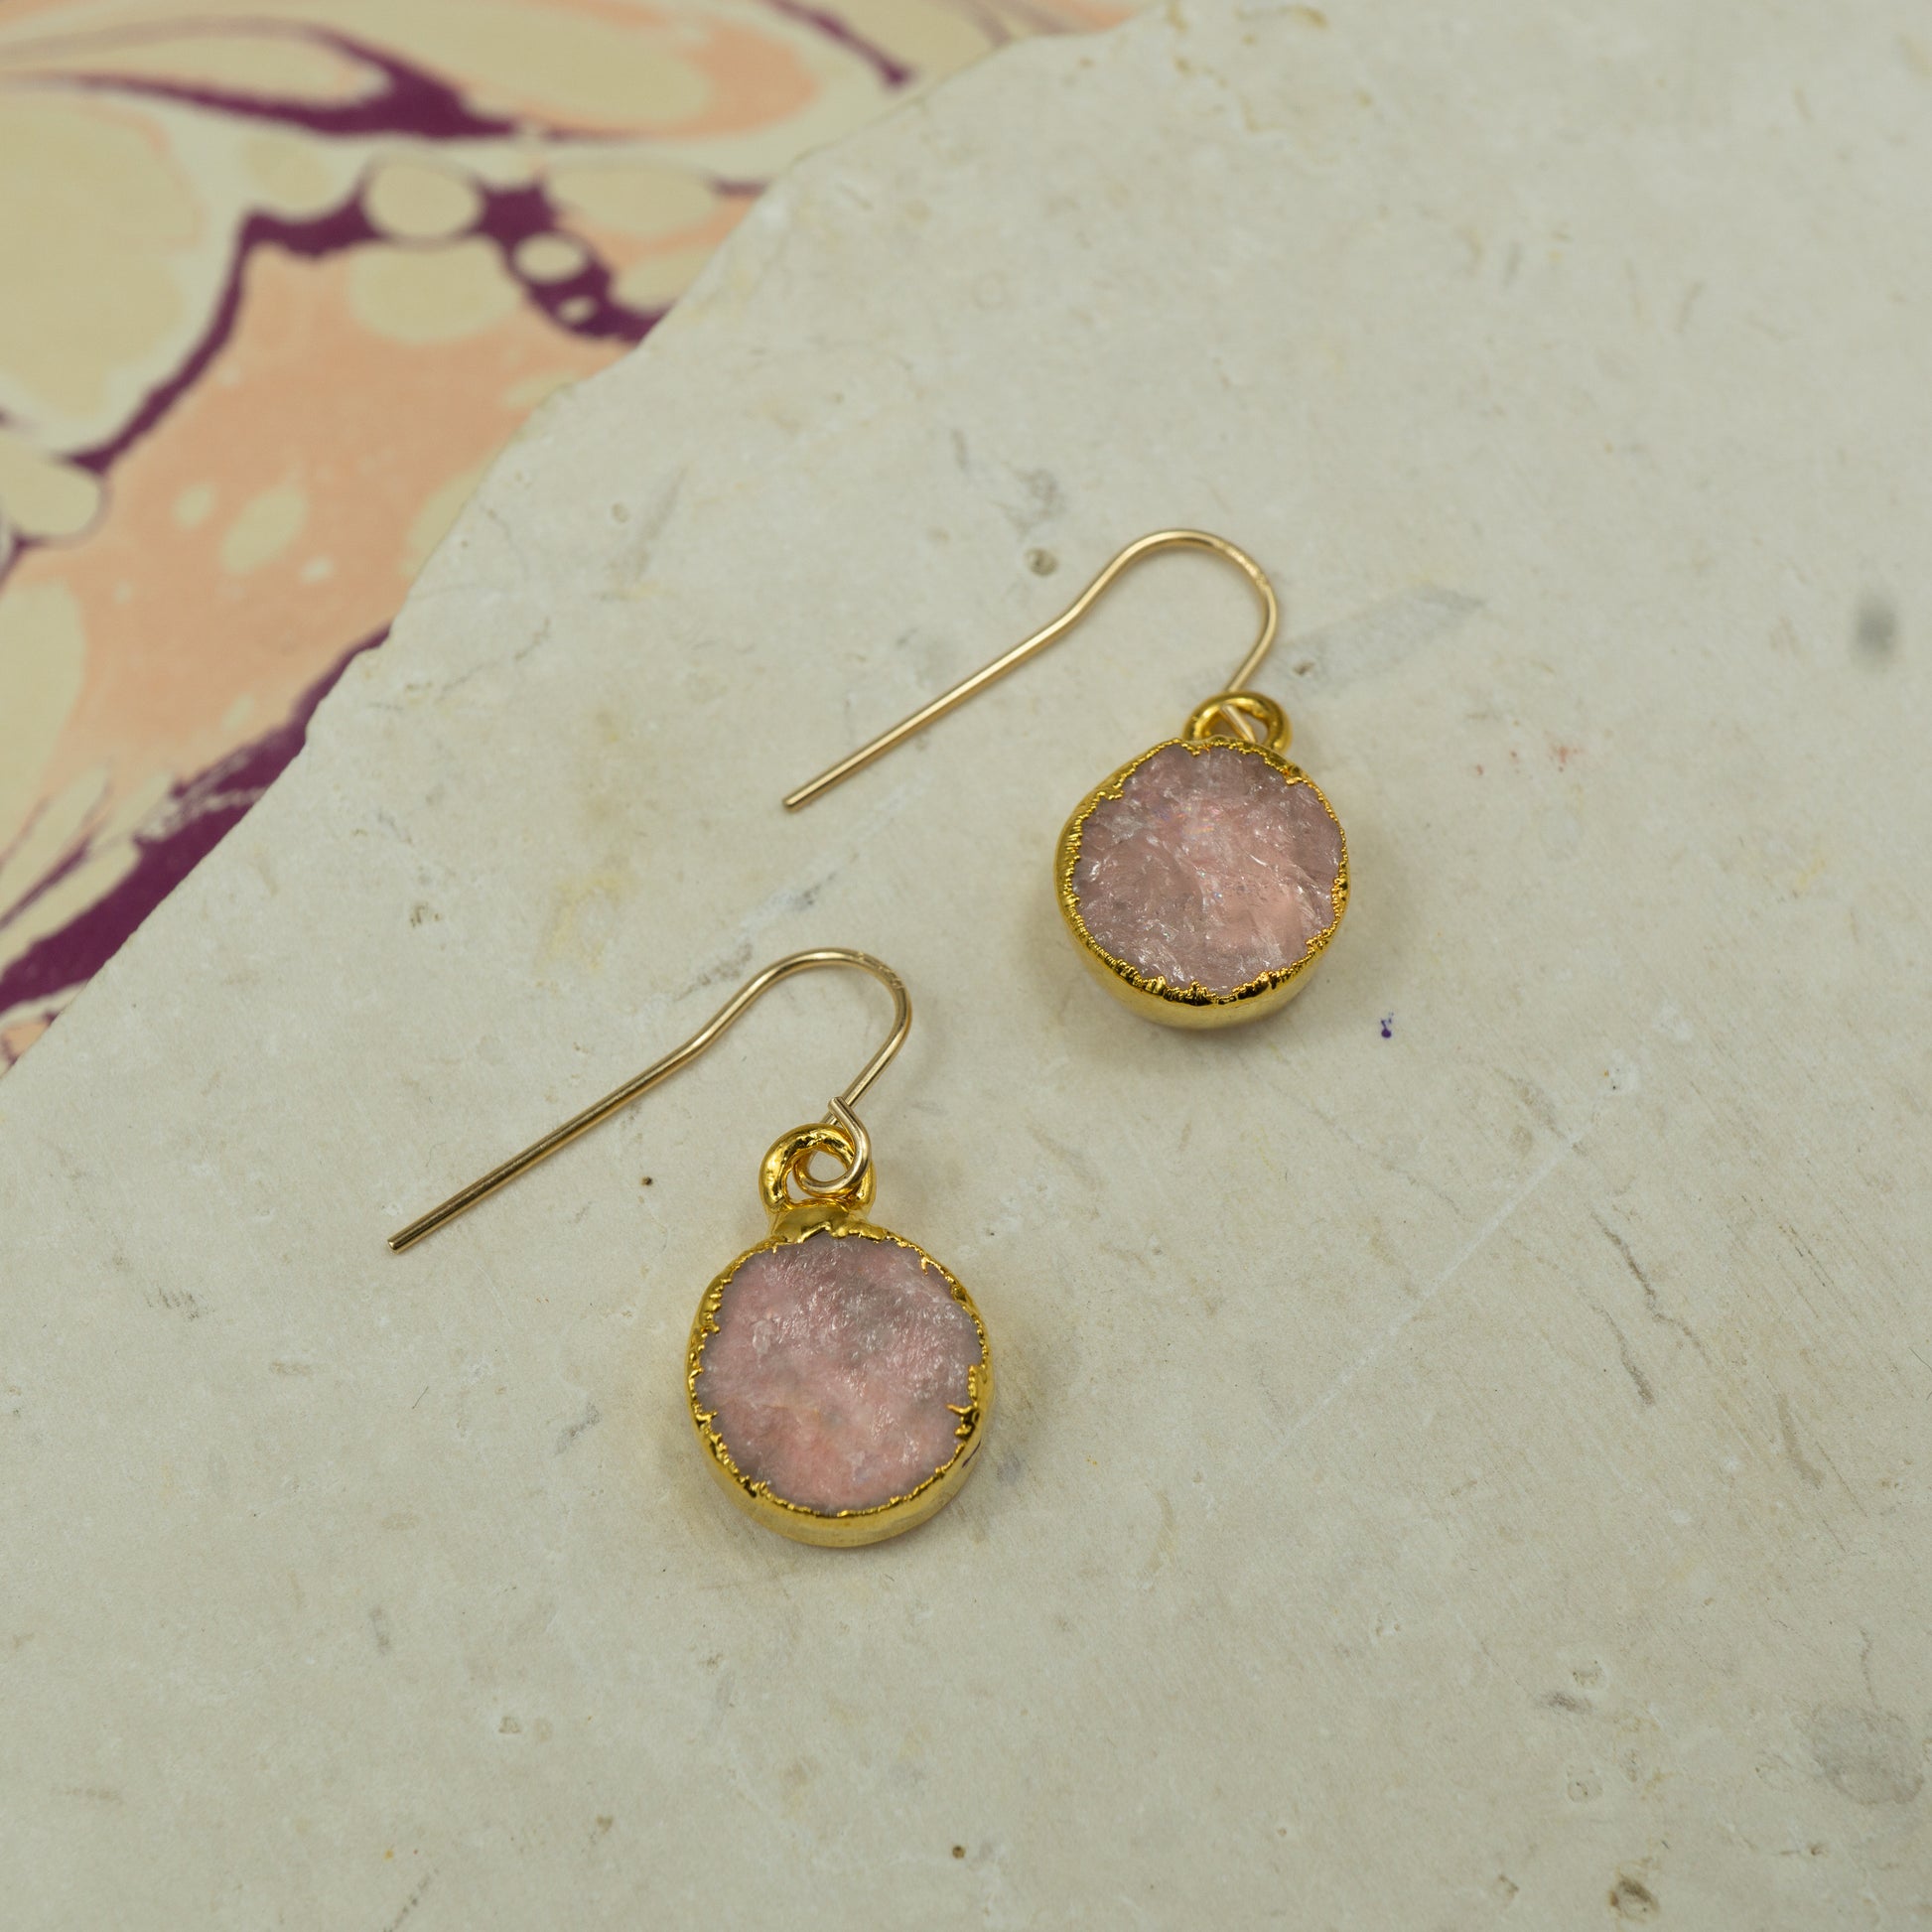 Round raw pink rose quartz earrings on hooks finished in gold.